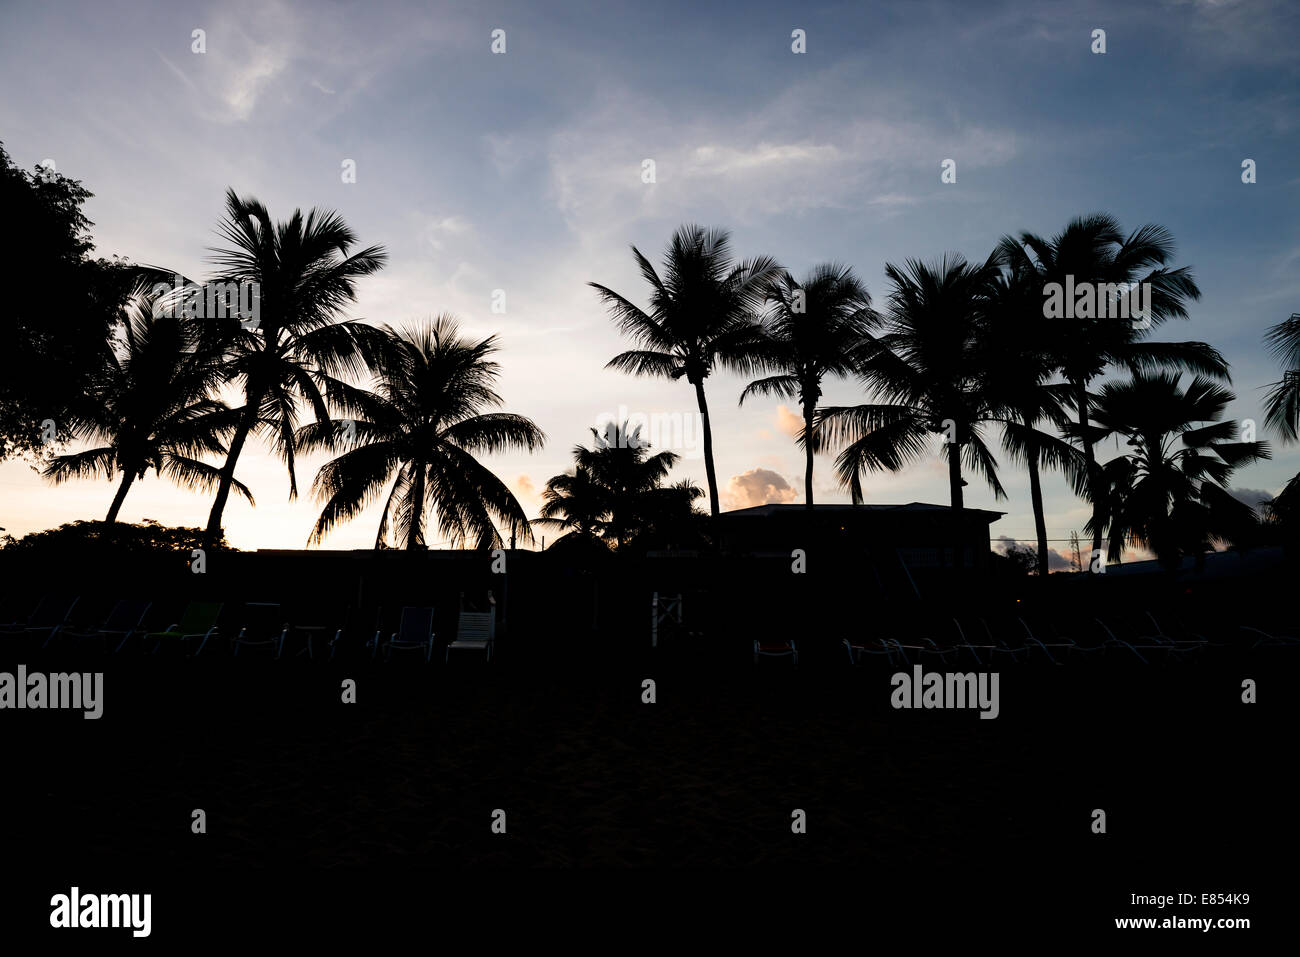 Dawn breaks over Cottages by the Sea  resort, showing the buildings and coconut palm trees in silhouette on the island of St. Croix, USVI. Stock Photo